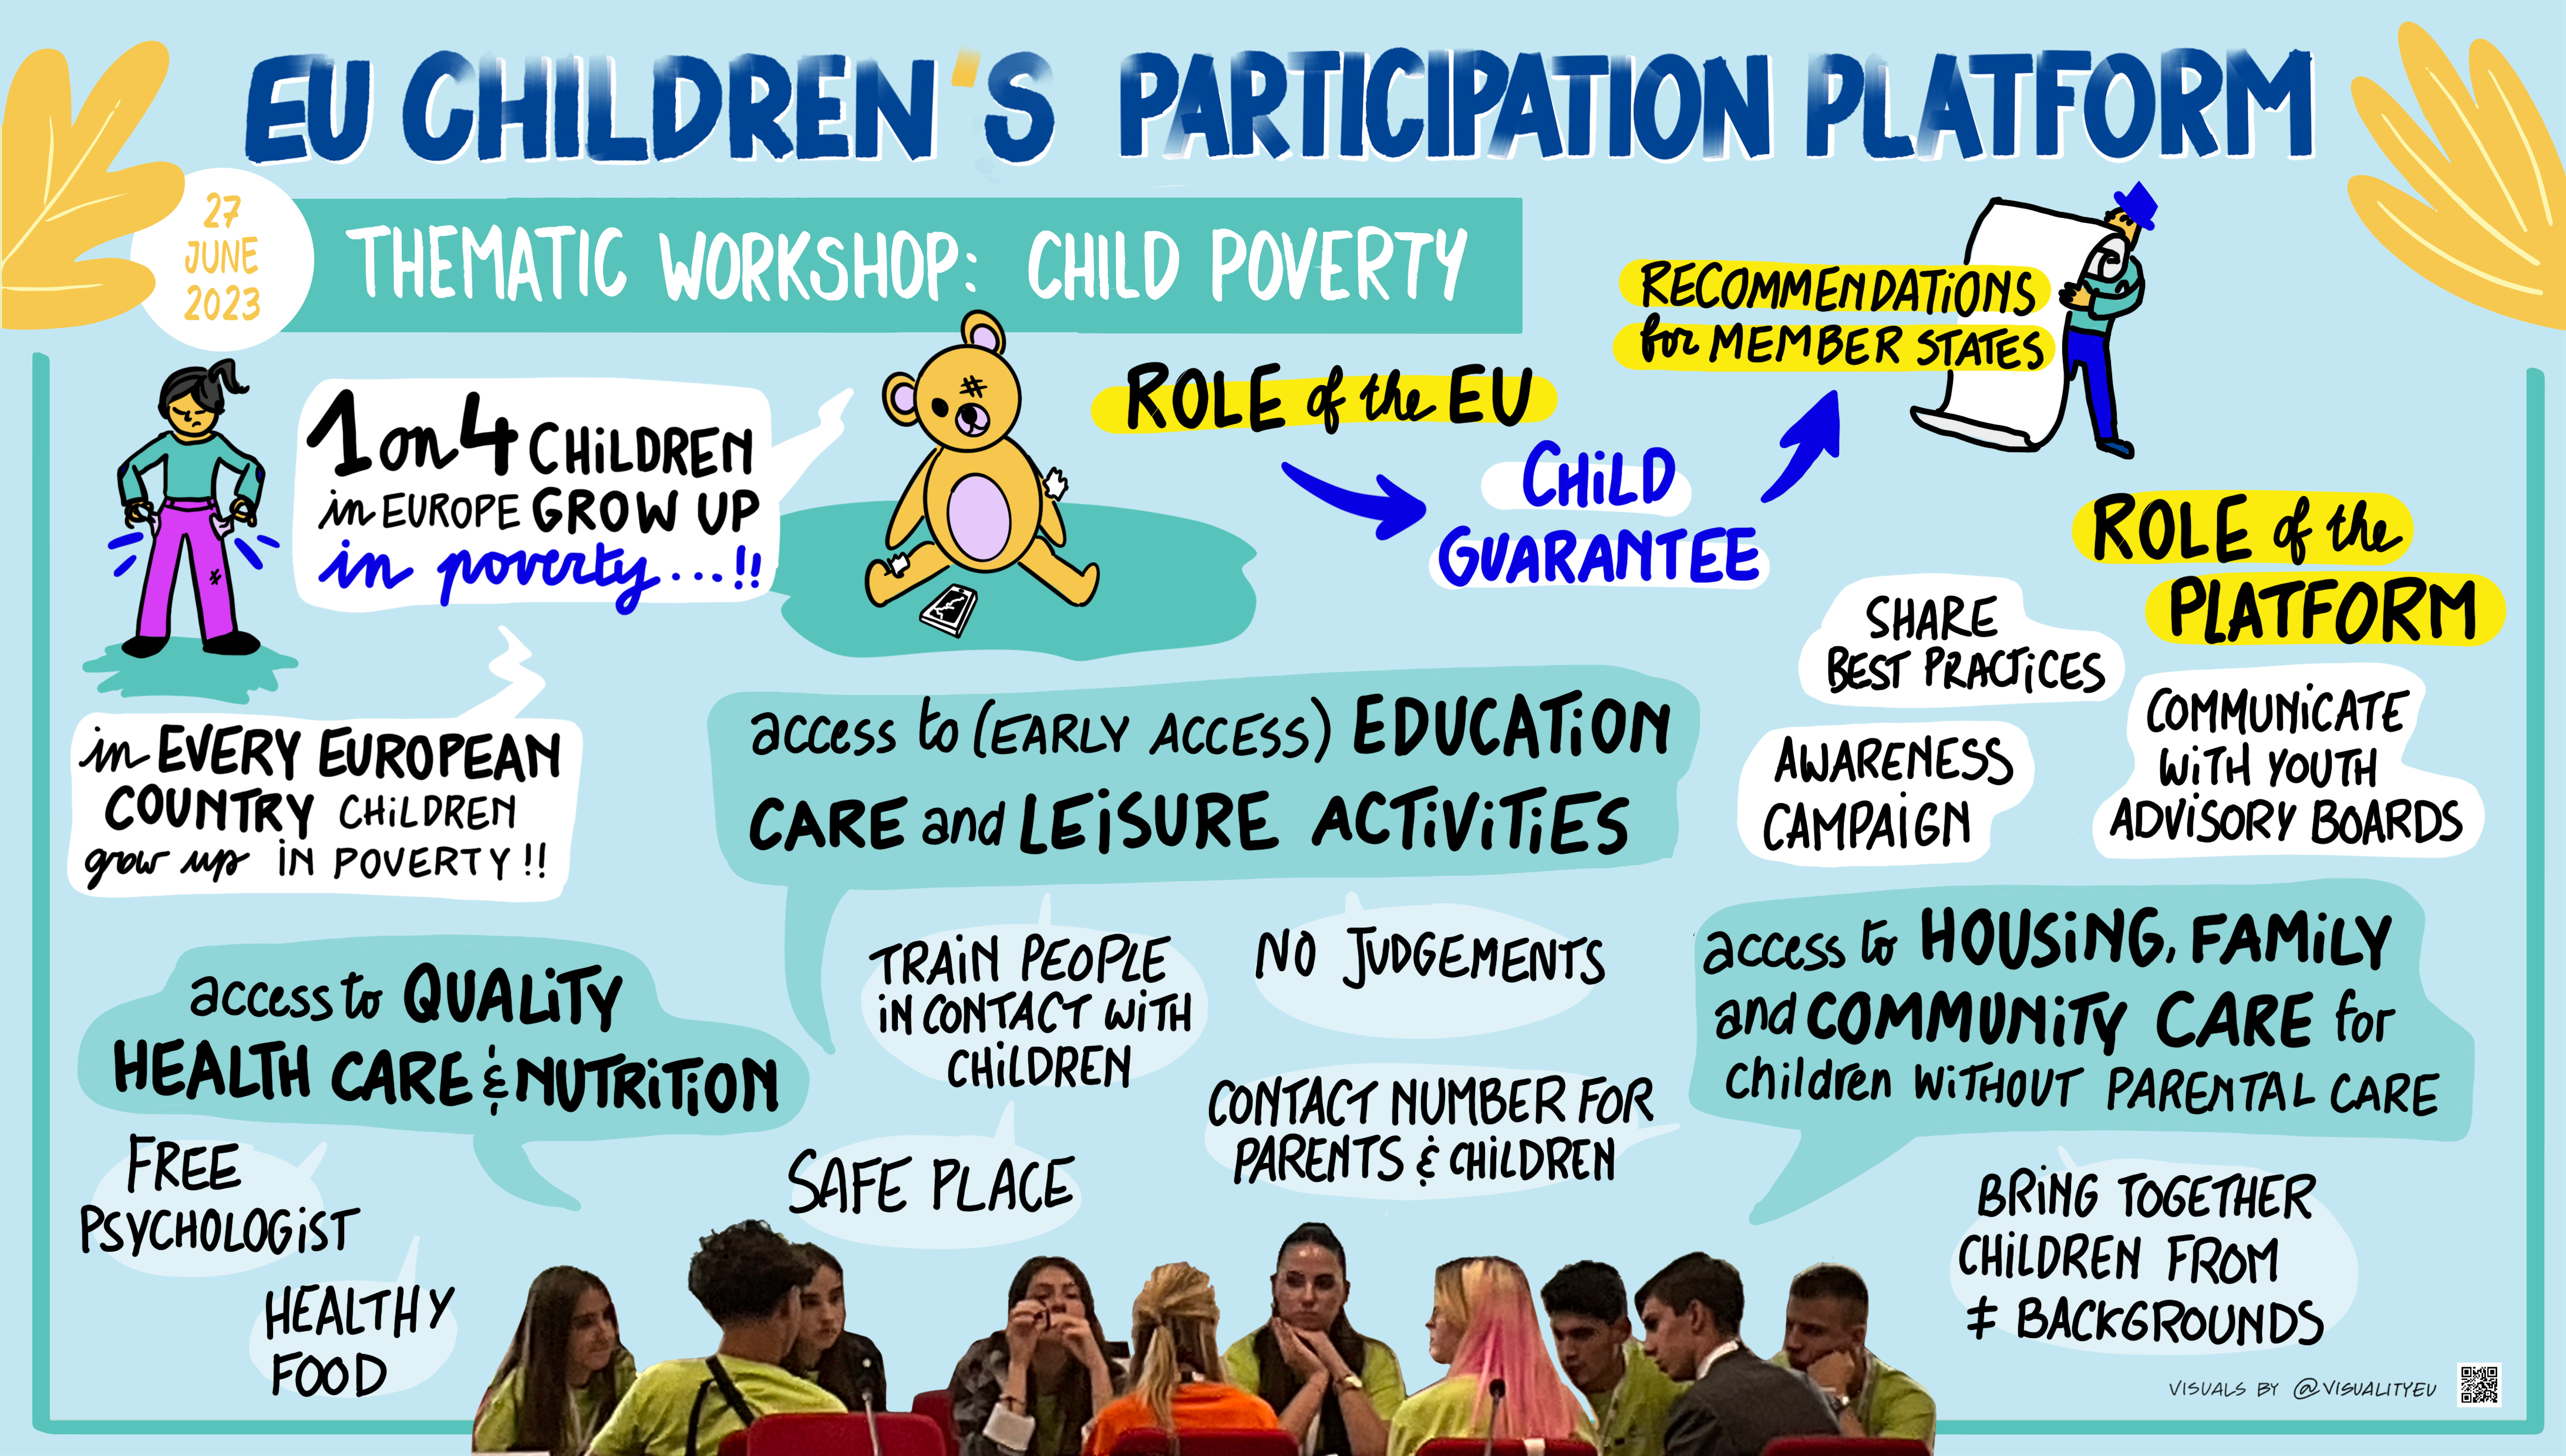 Children workshop on child poverty – EU role, Platform impact, and Member State recommendations